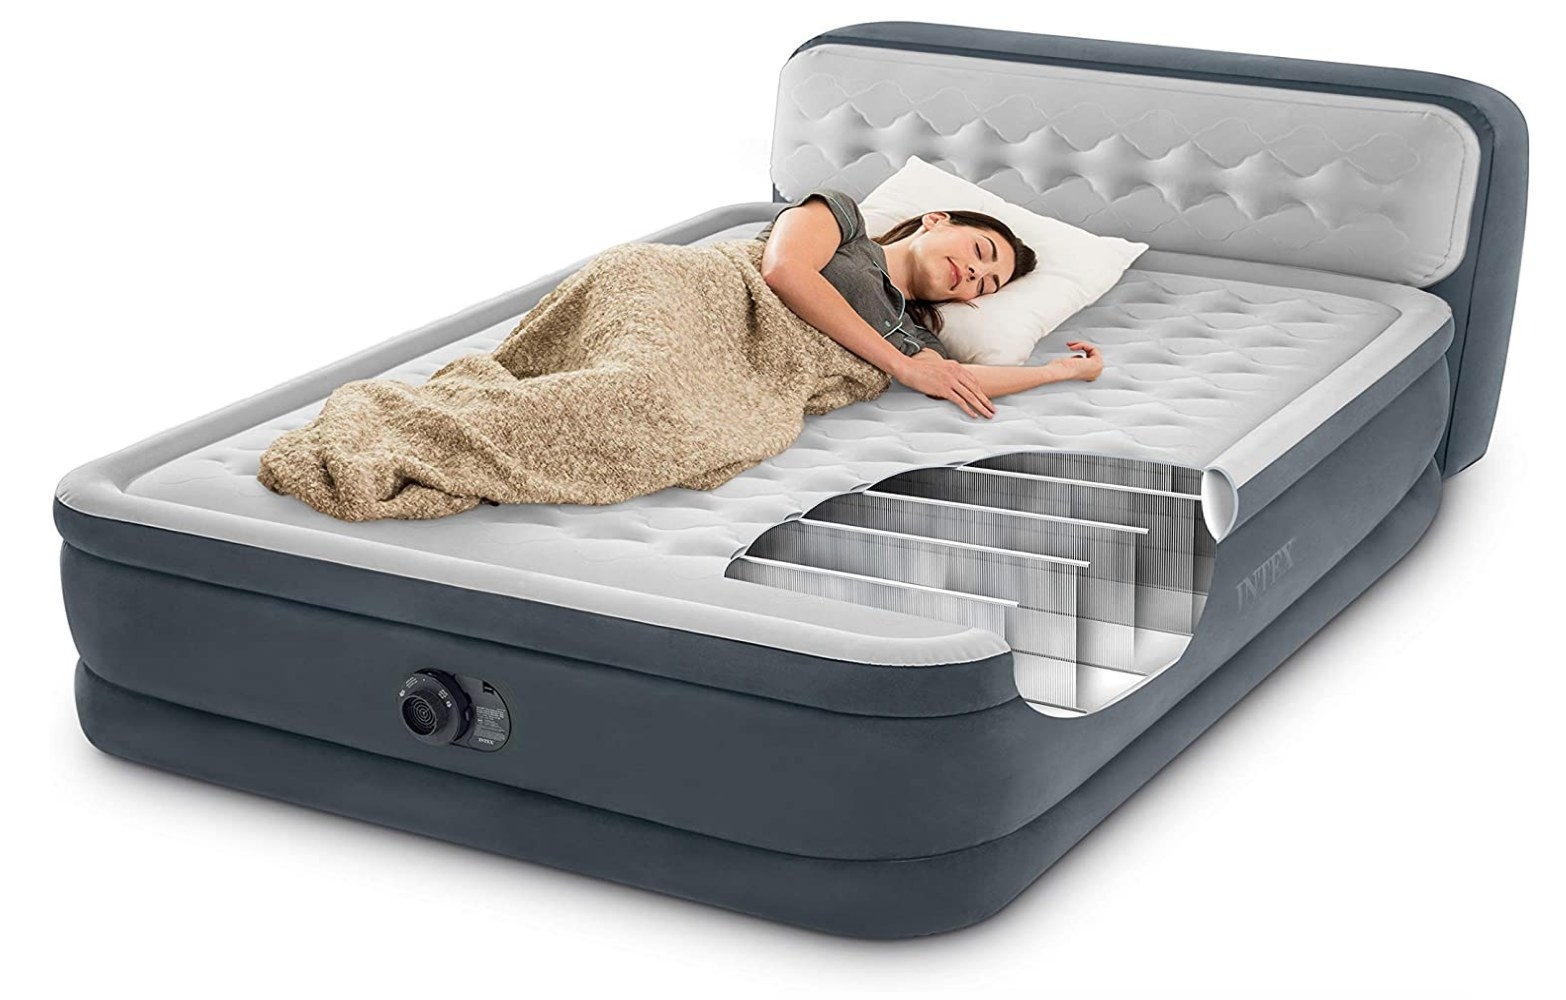 A model lying on a soft air mattress with a built-in pump, ultra plush headboard, and portable storage carrying case